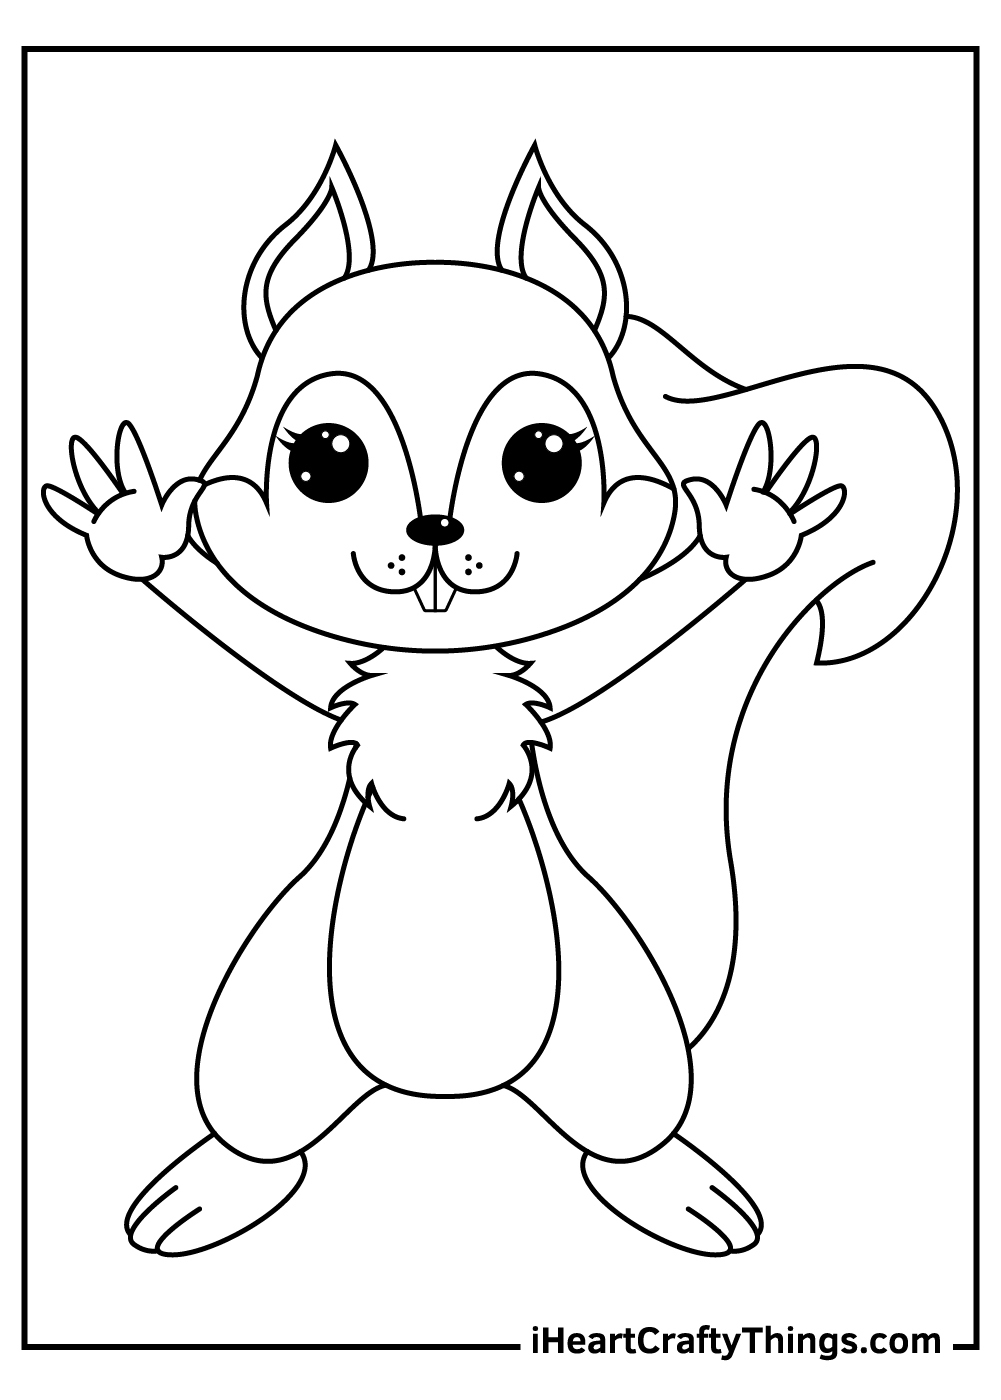 Squirrels Coloring Pages (100% Free Printables) - Free Printable Squirrel Pictures